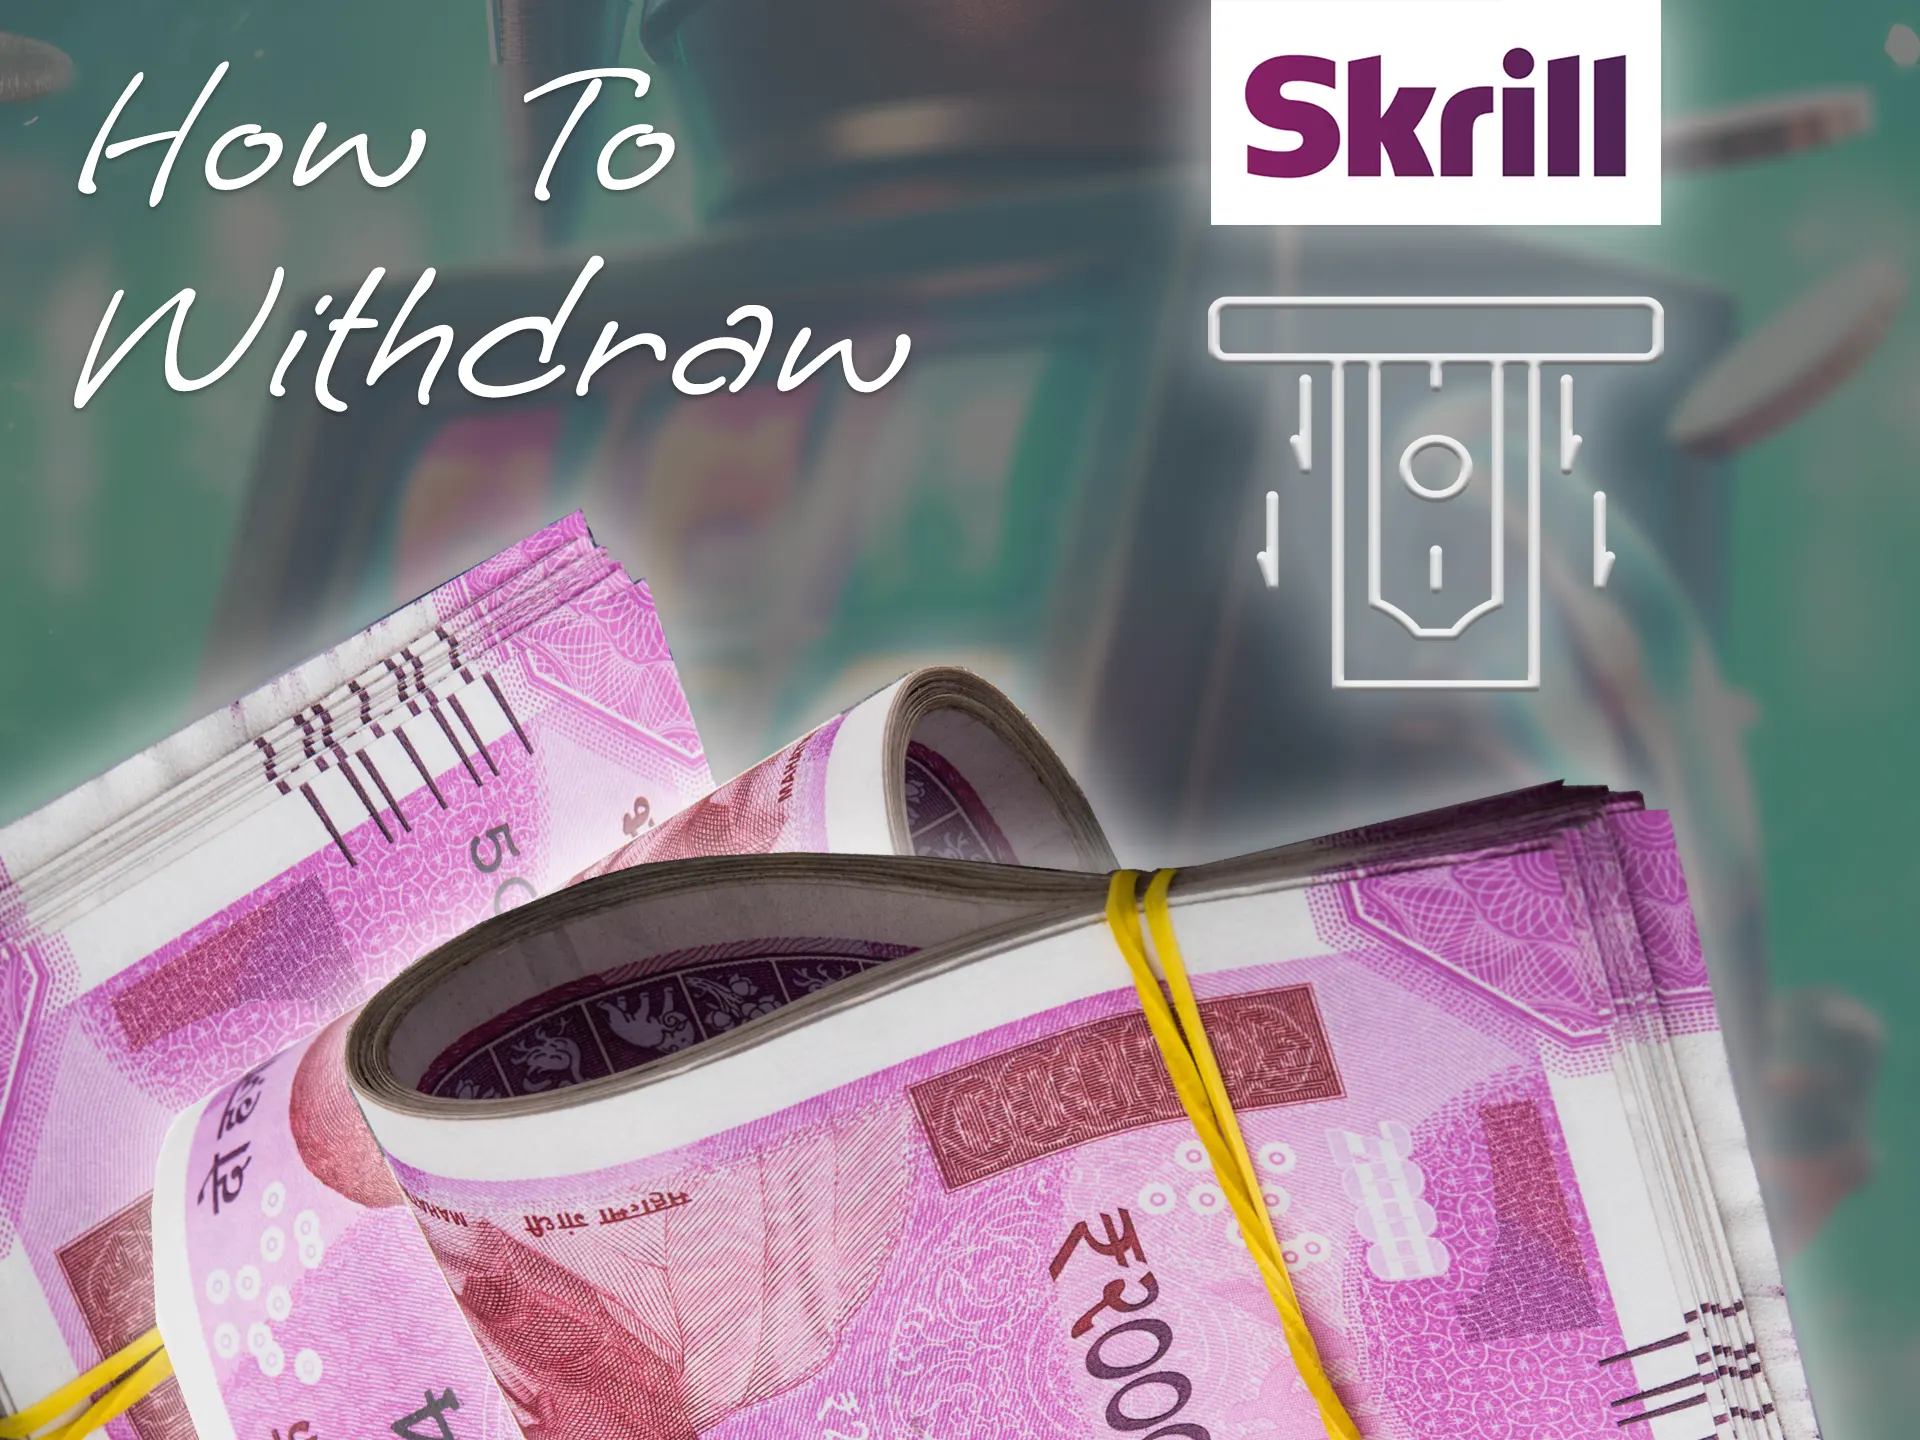 Withdraw money from your gaming account using the Skrill payment system.